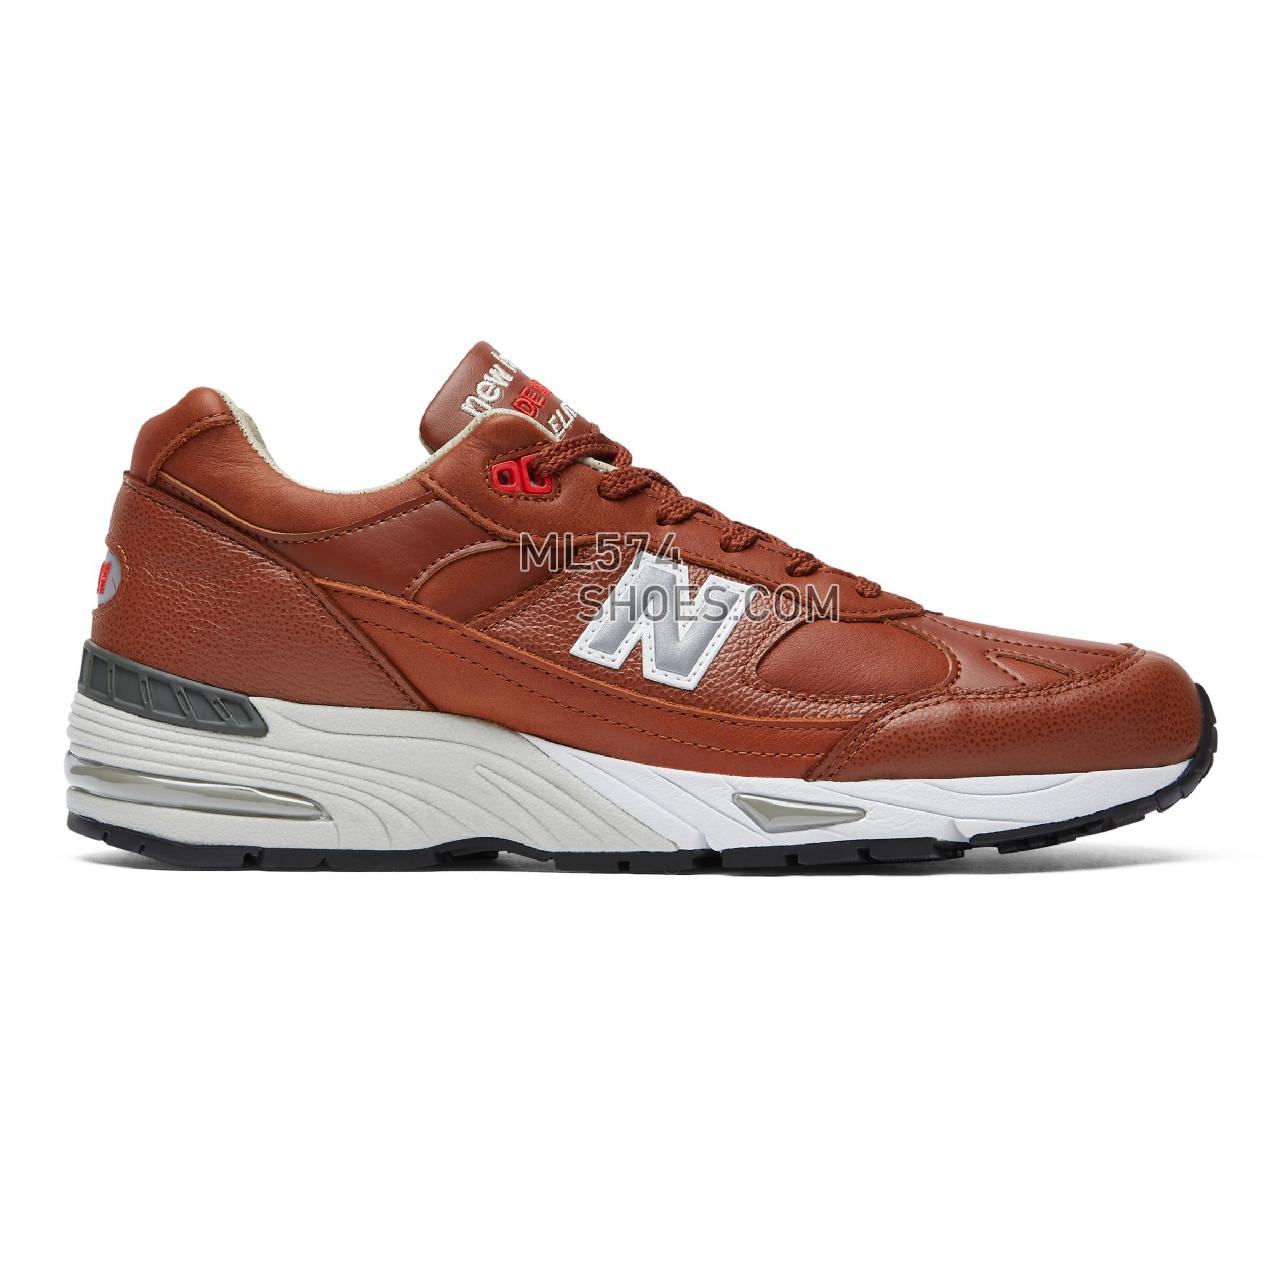 New Balance Made in UK 991 - Men's Made in UK 991 Classic ML991V1-27393-M - Burnt Orange with Silver and White - M991GNB